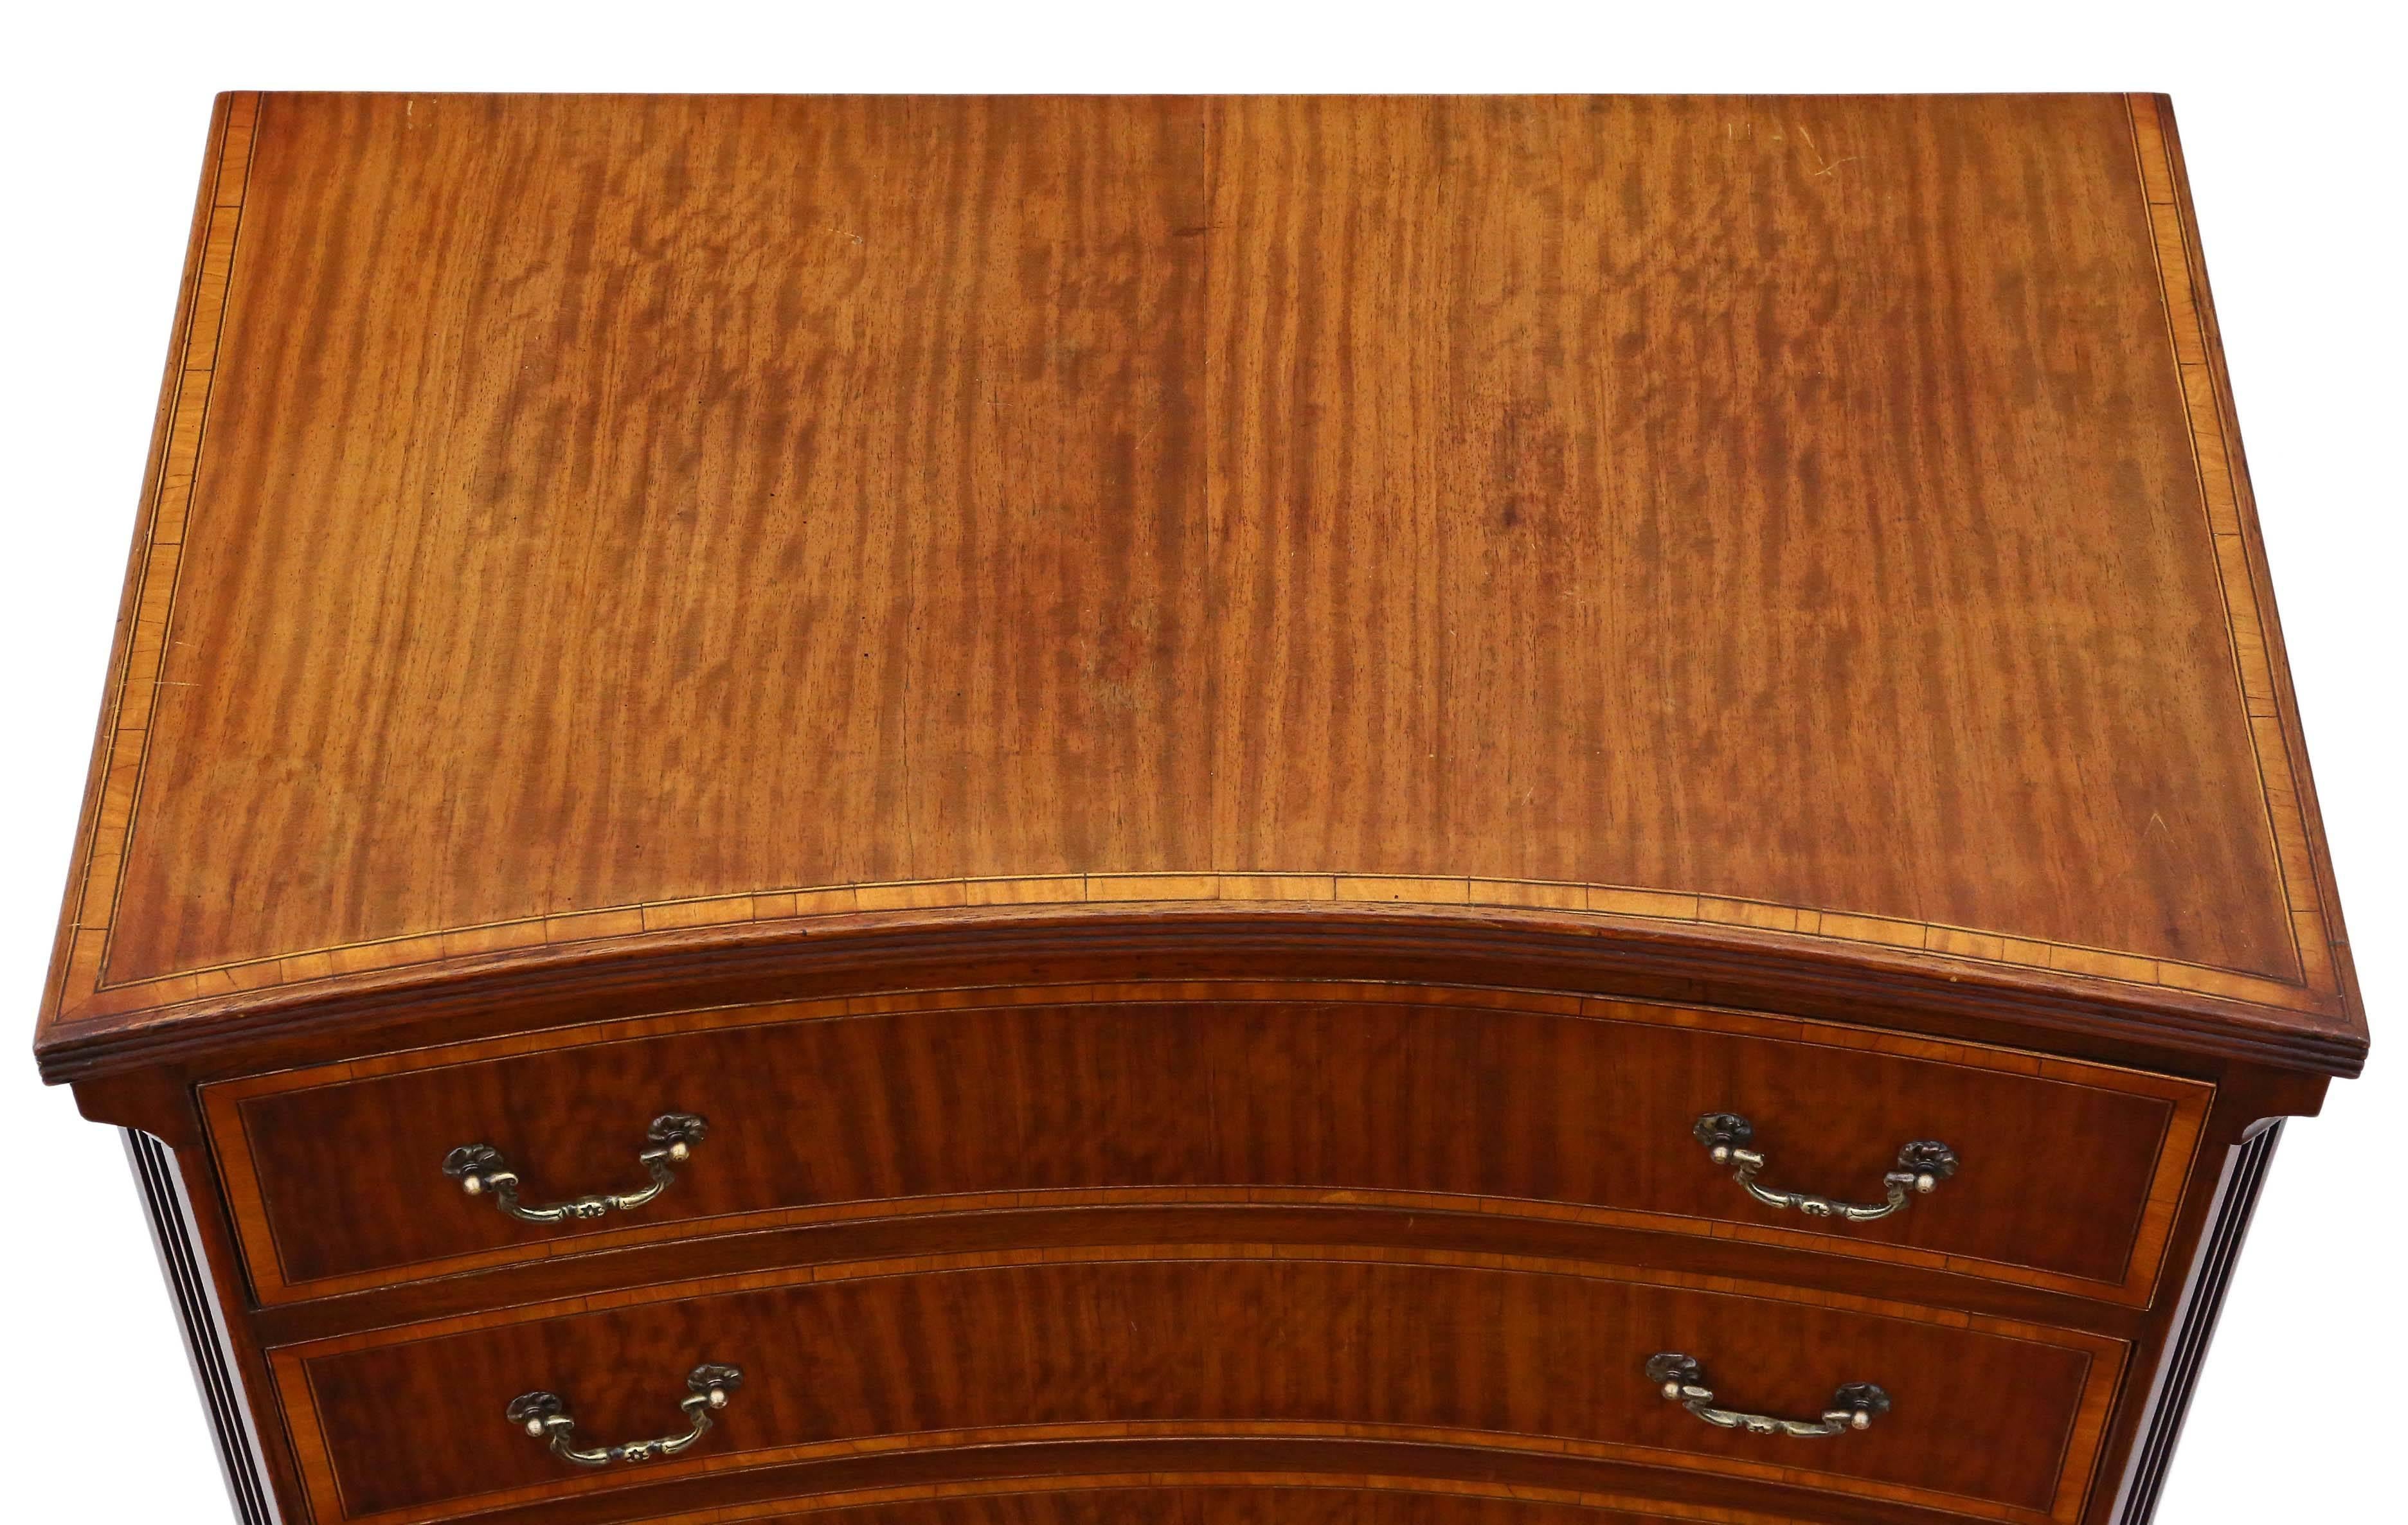 Antique small Georgian revival mahogany chest of drawers dating from C1950. Rare concave front with attractive crossbanding and mahogany veneers. Great sought after size and proportions.

No loose joints and the drawers slide freely.

No